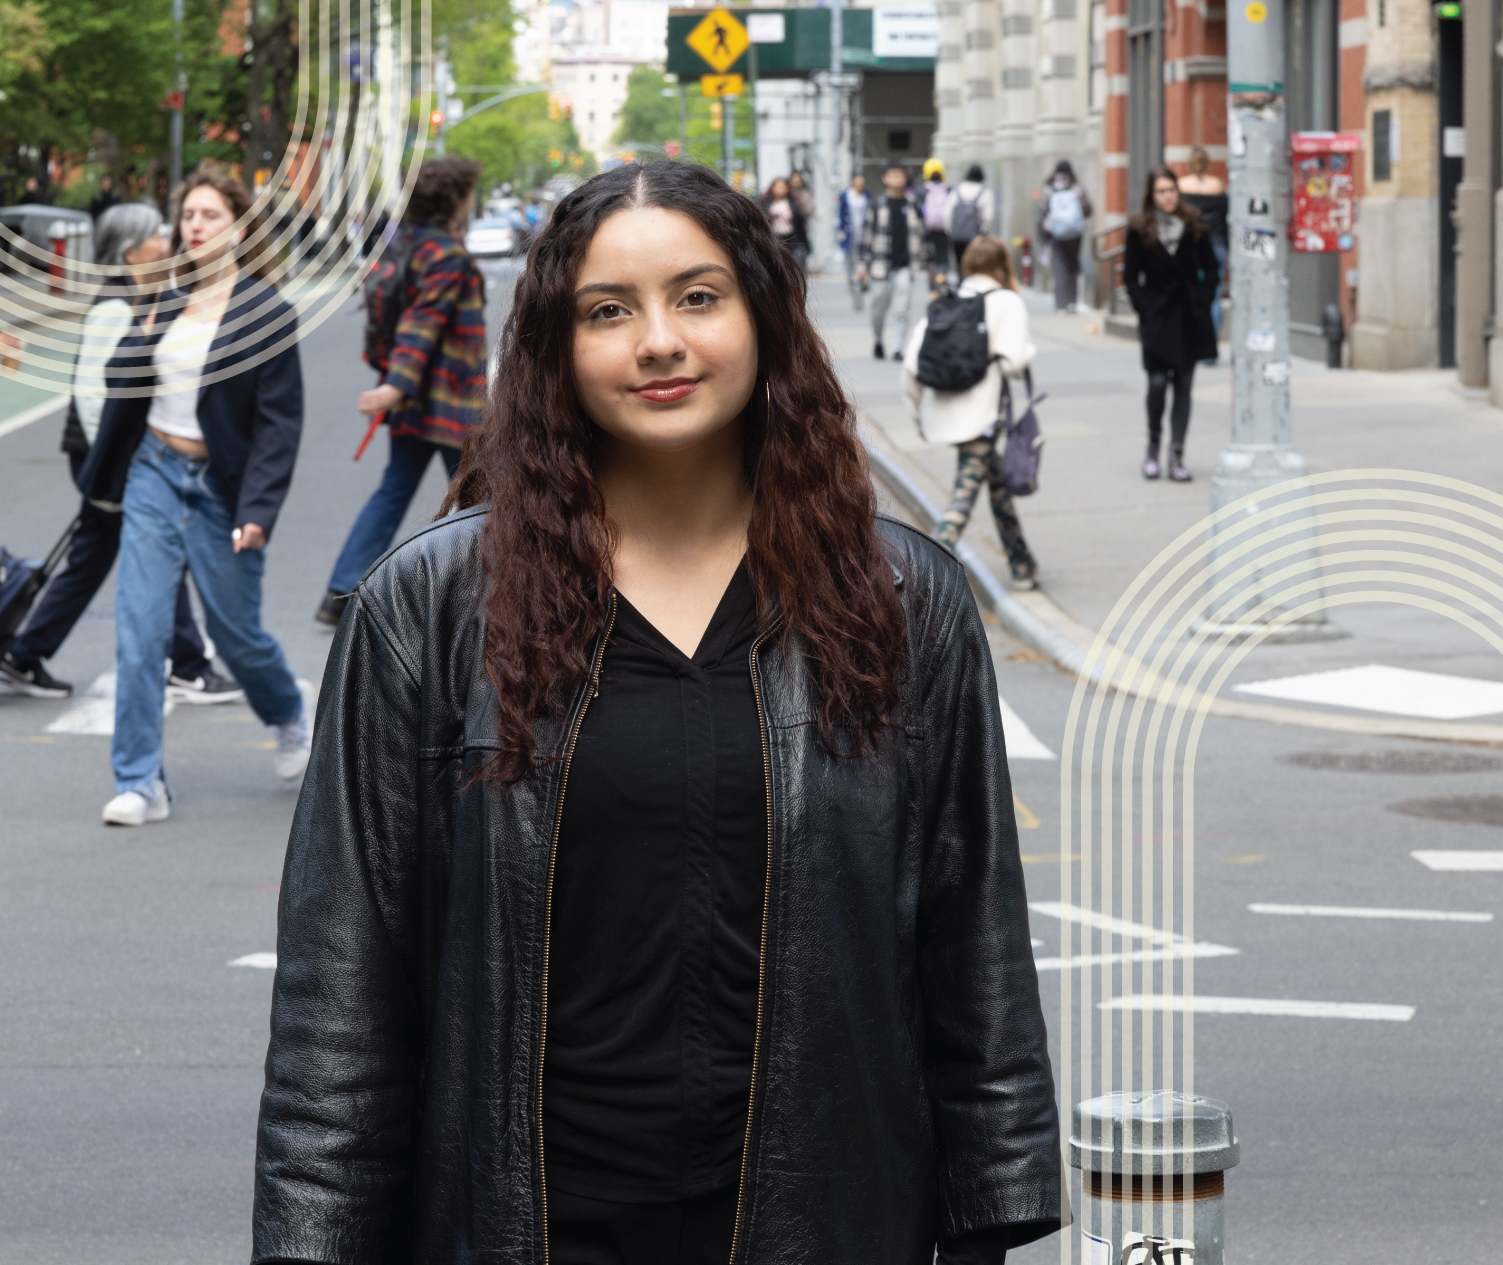 Sofia Elhusseini on a busy street in New York City.